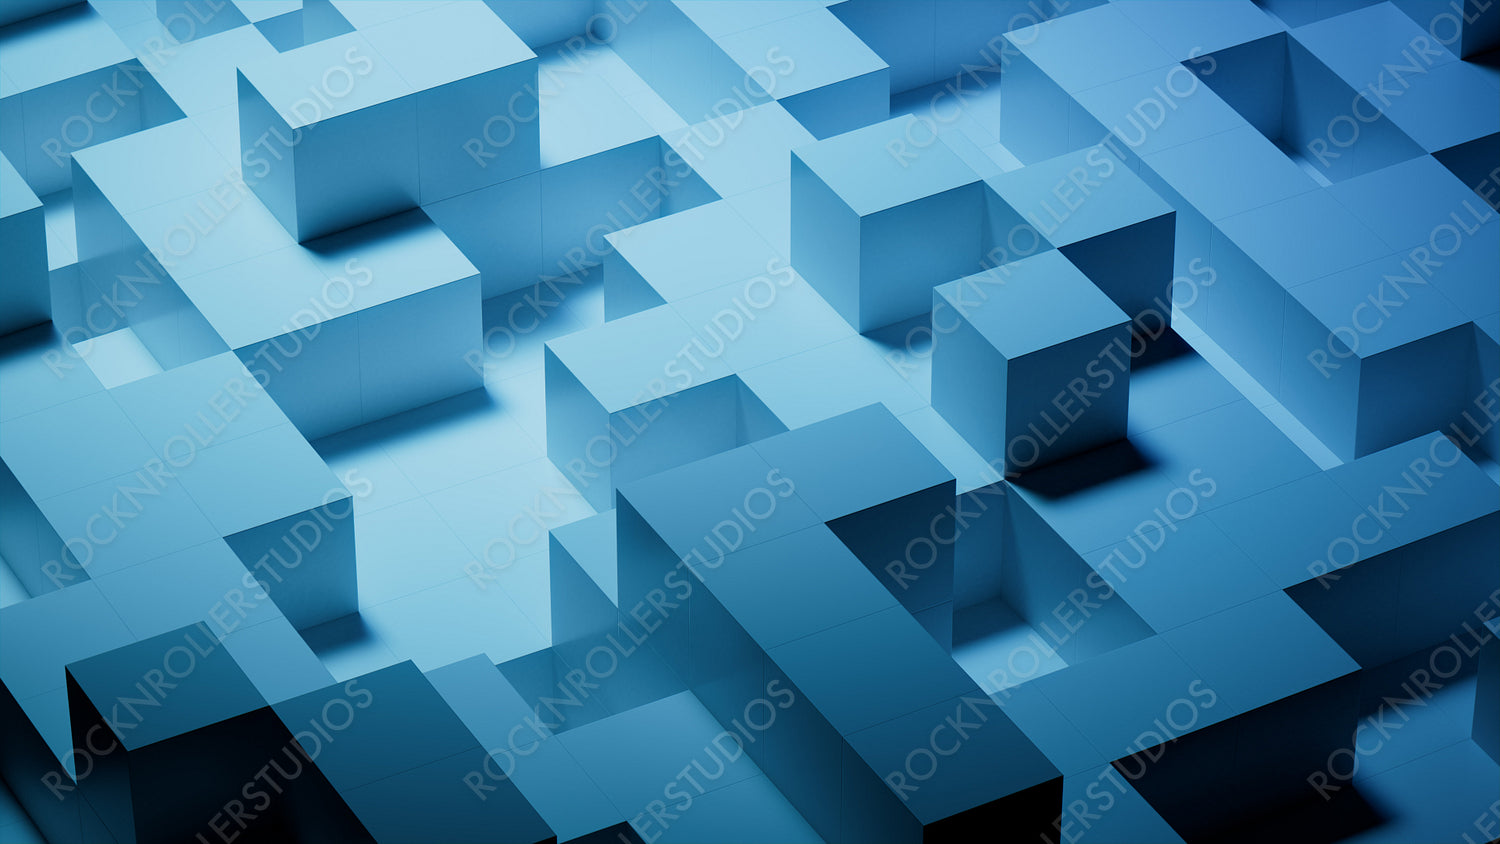 Perfectly Aligned Glossy Cubes. Blue, Modern Tech Wallpaper. 3D Render.